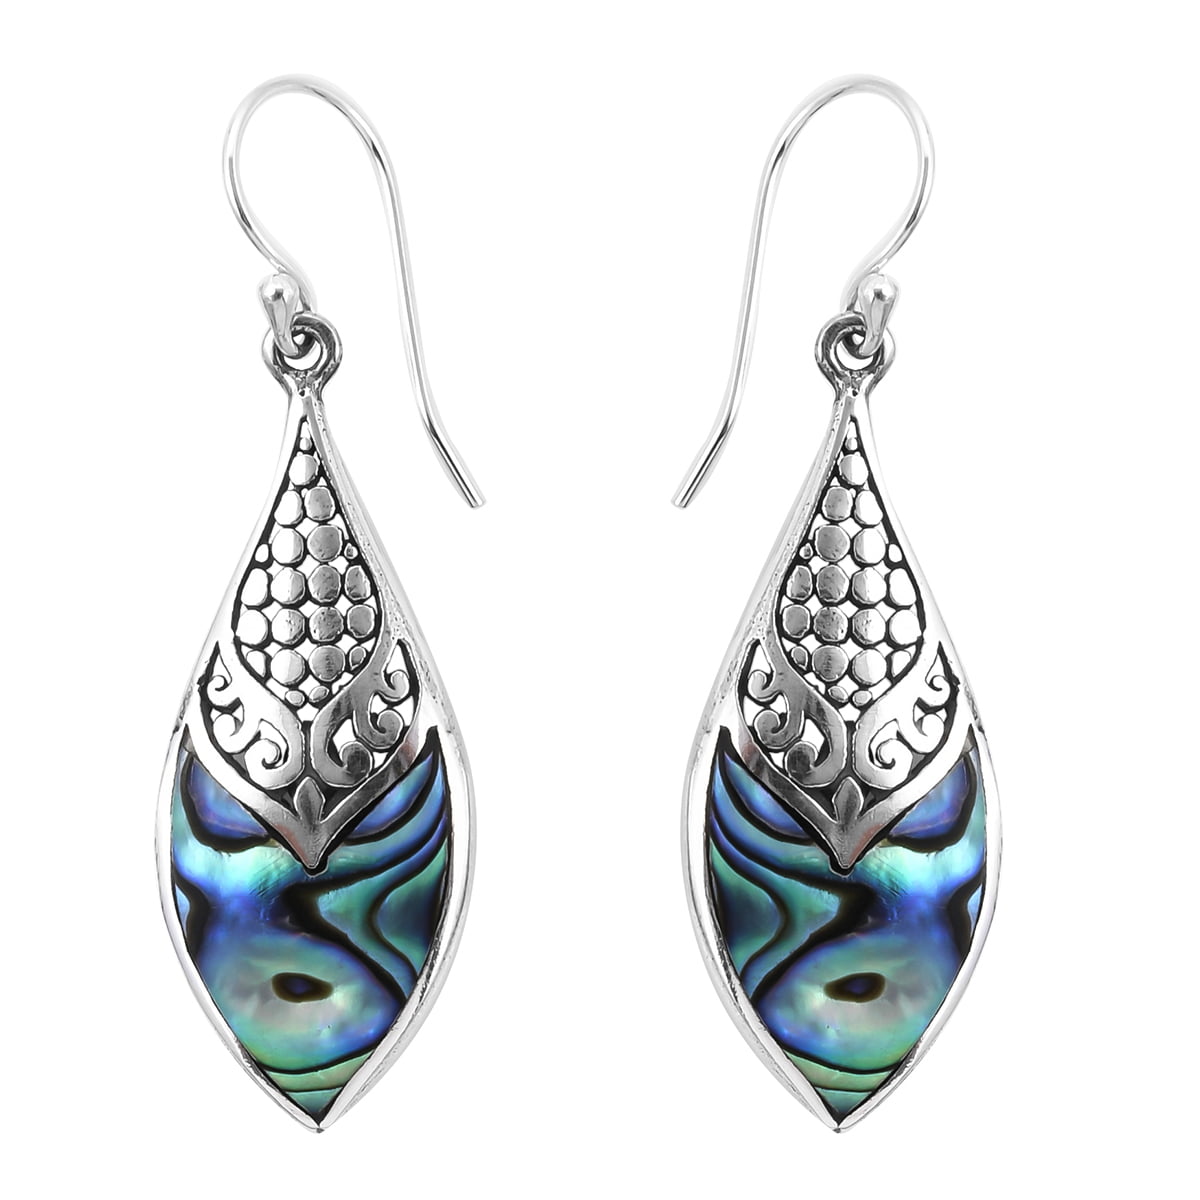 UNIQUE DESIGNER HANDMADE JEWELRY BY ARTISANS FIRE ABALONE SHELL IN 925 STERLING SILVER FINE FILIGREE ETHNIC TRIBAL FASHION DROP DANGLE BALINESE EARRING FOR WOMEN & GIRLS